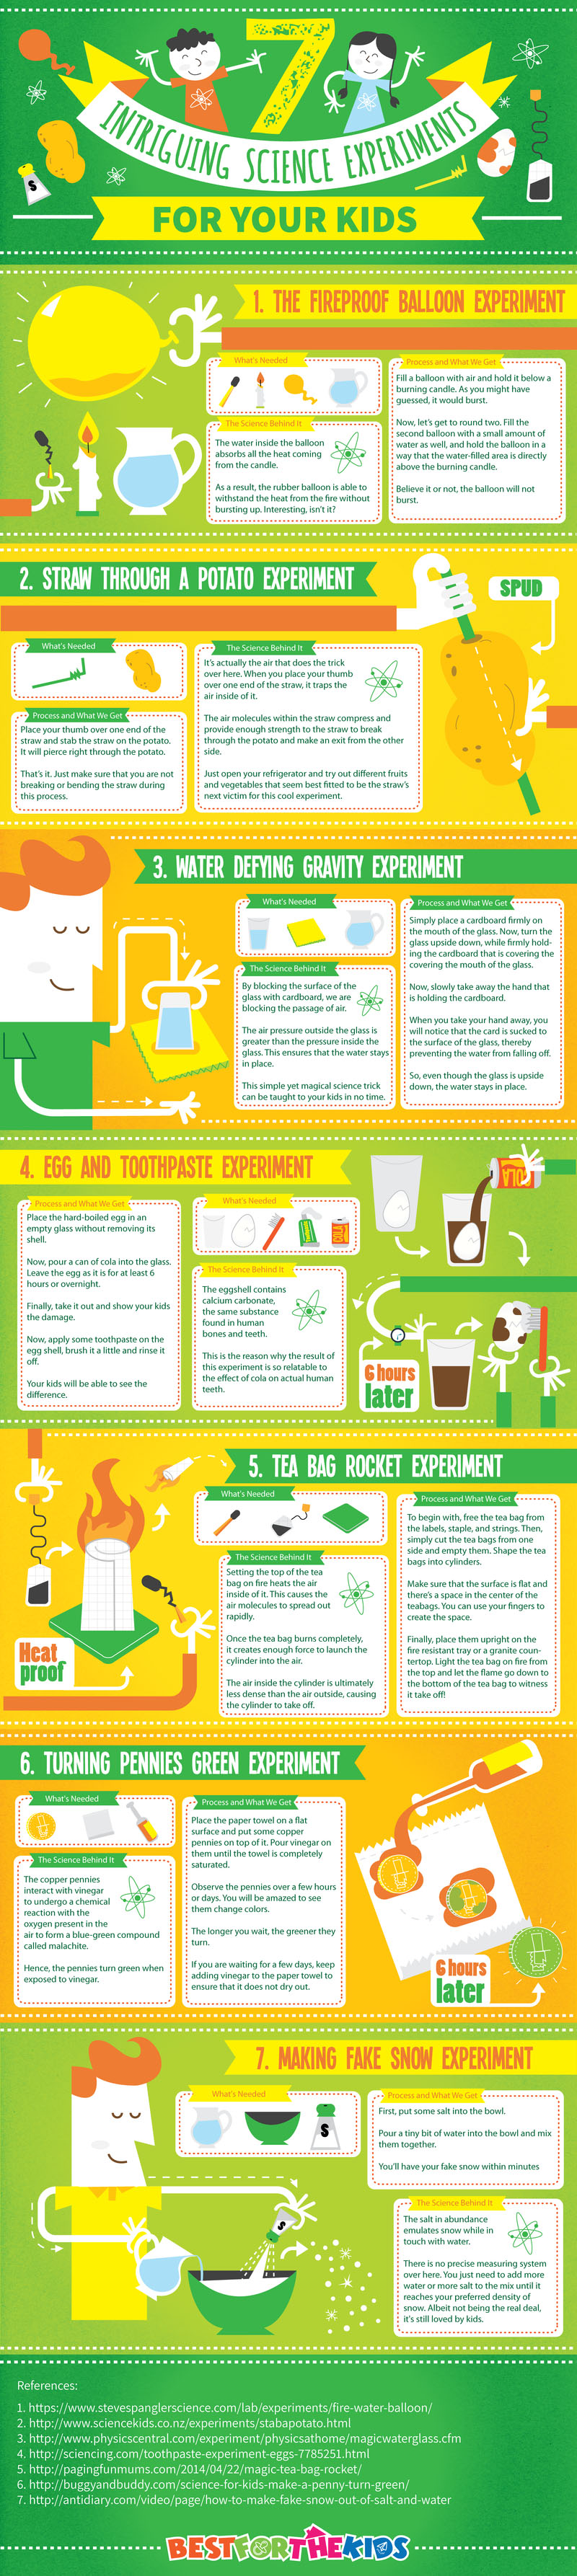 7 Intriguing Science Experiments for Your Kids